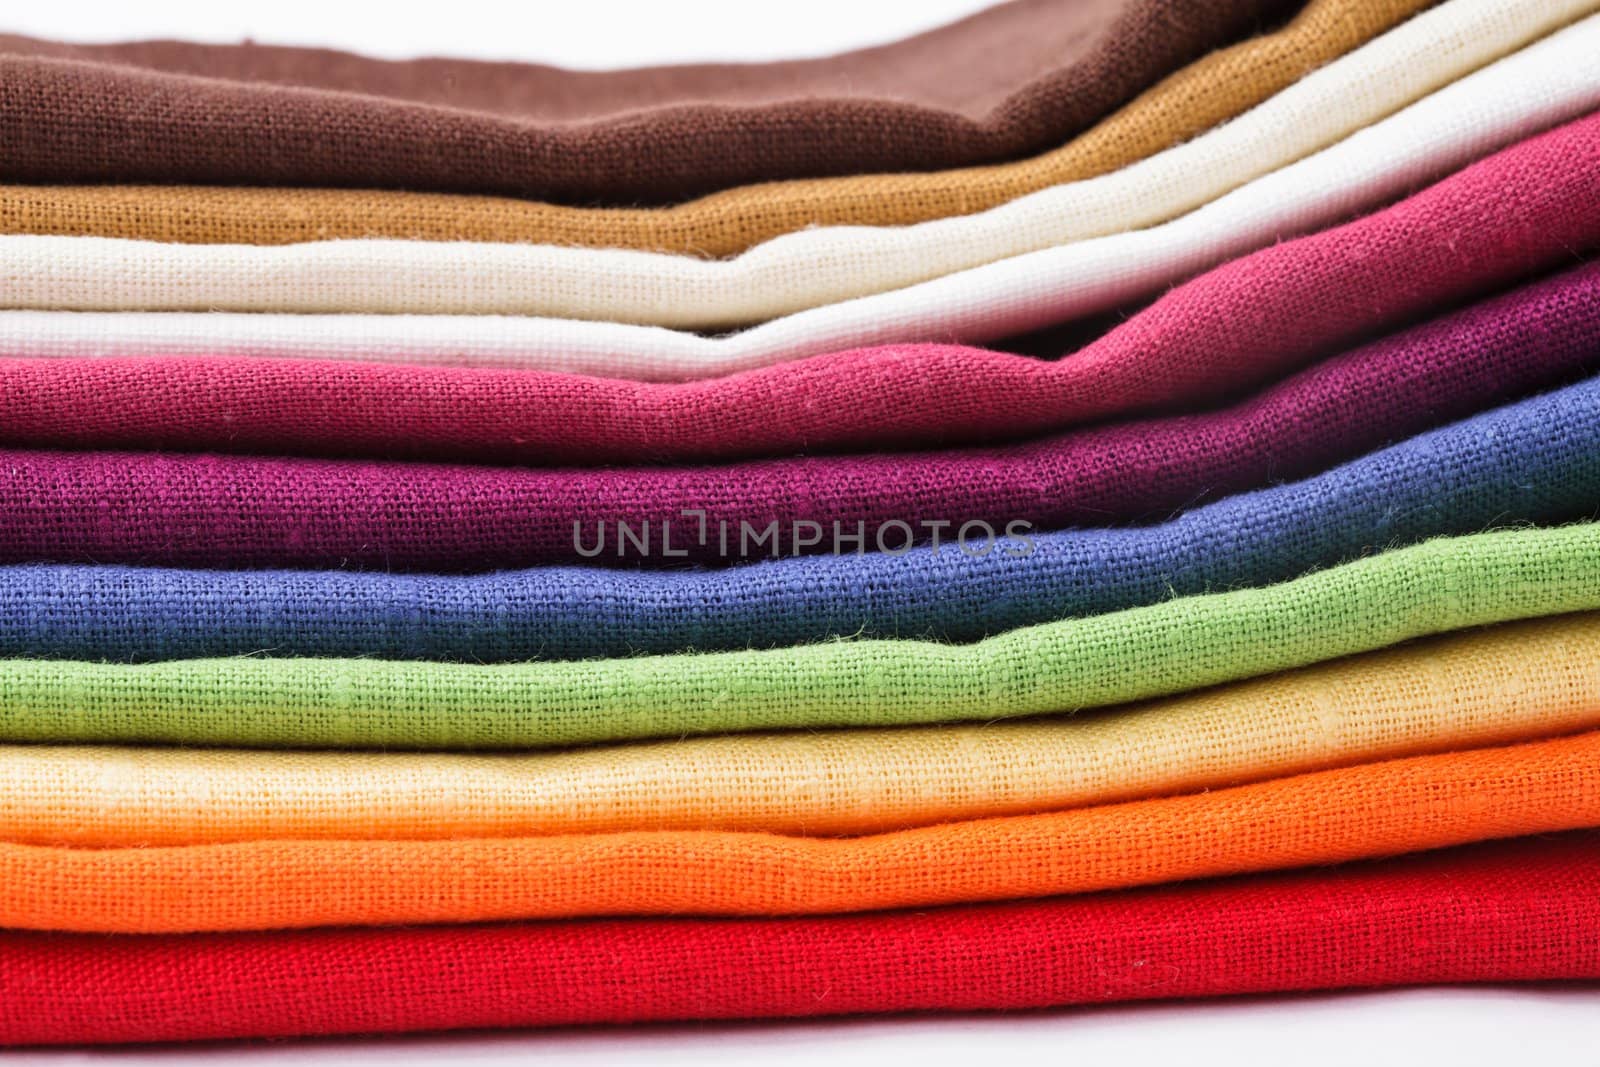 Colourful flax texrile heap for a tableware